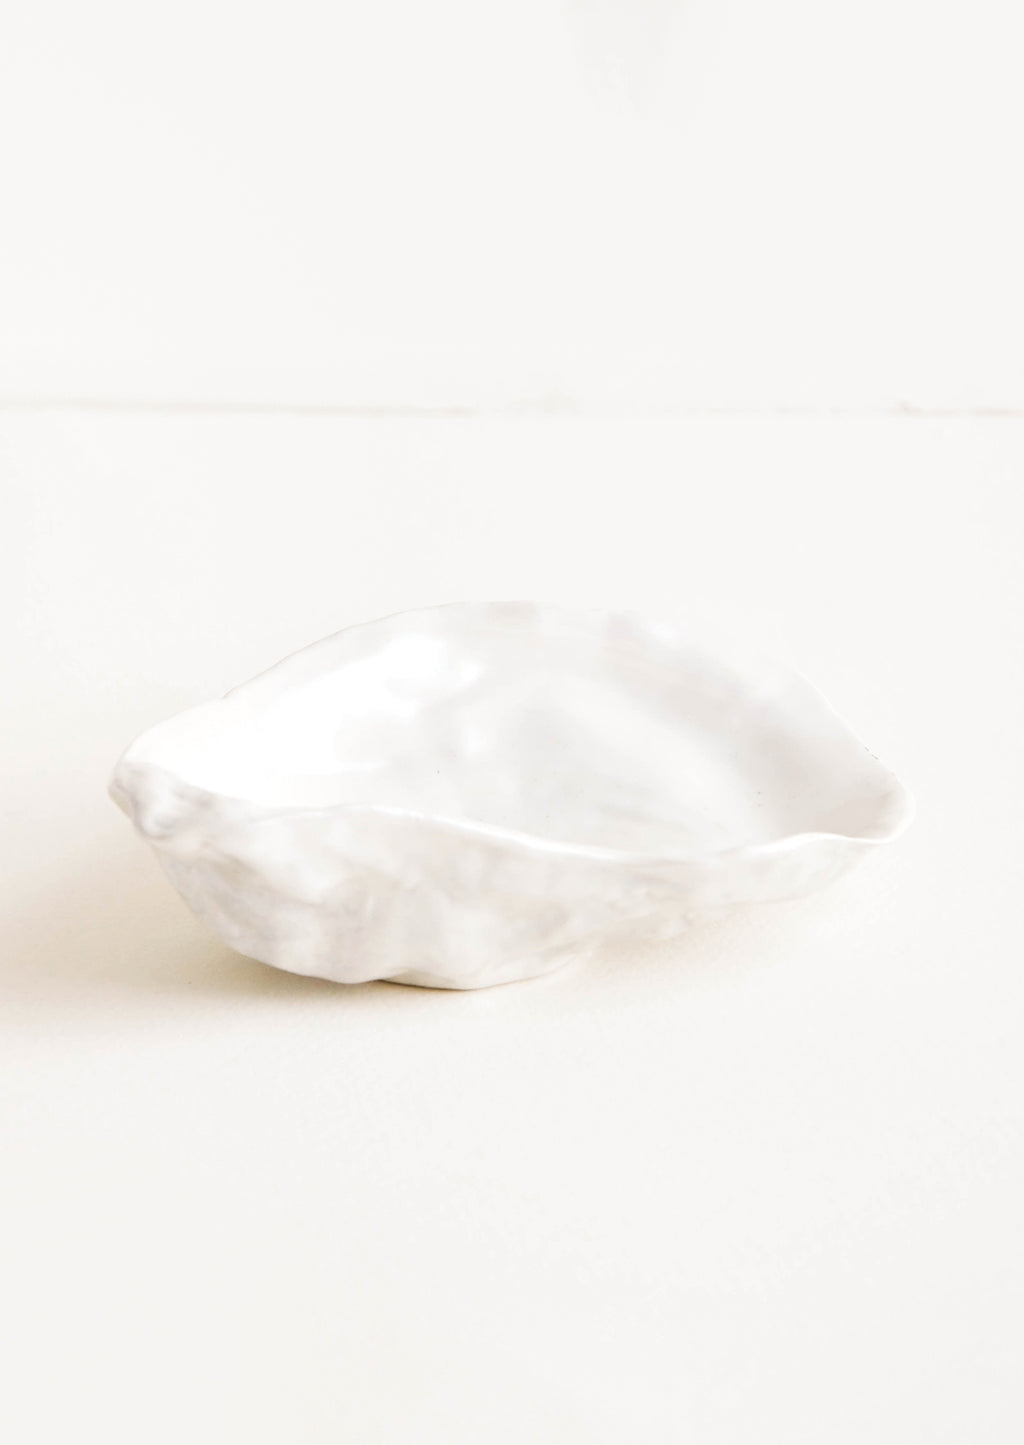 2: A small, pearly white ceramic dish molded in the shape of an oyster half shell